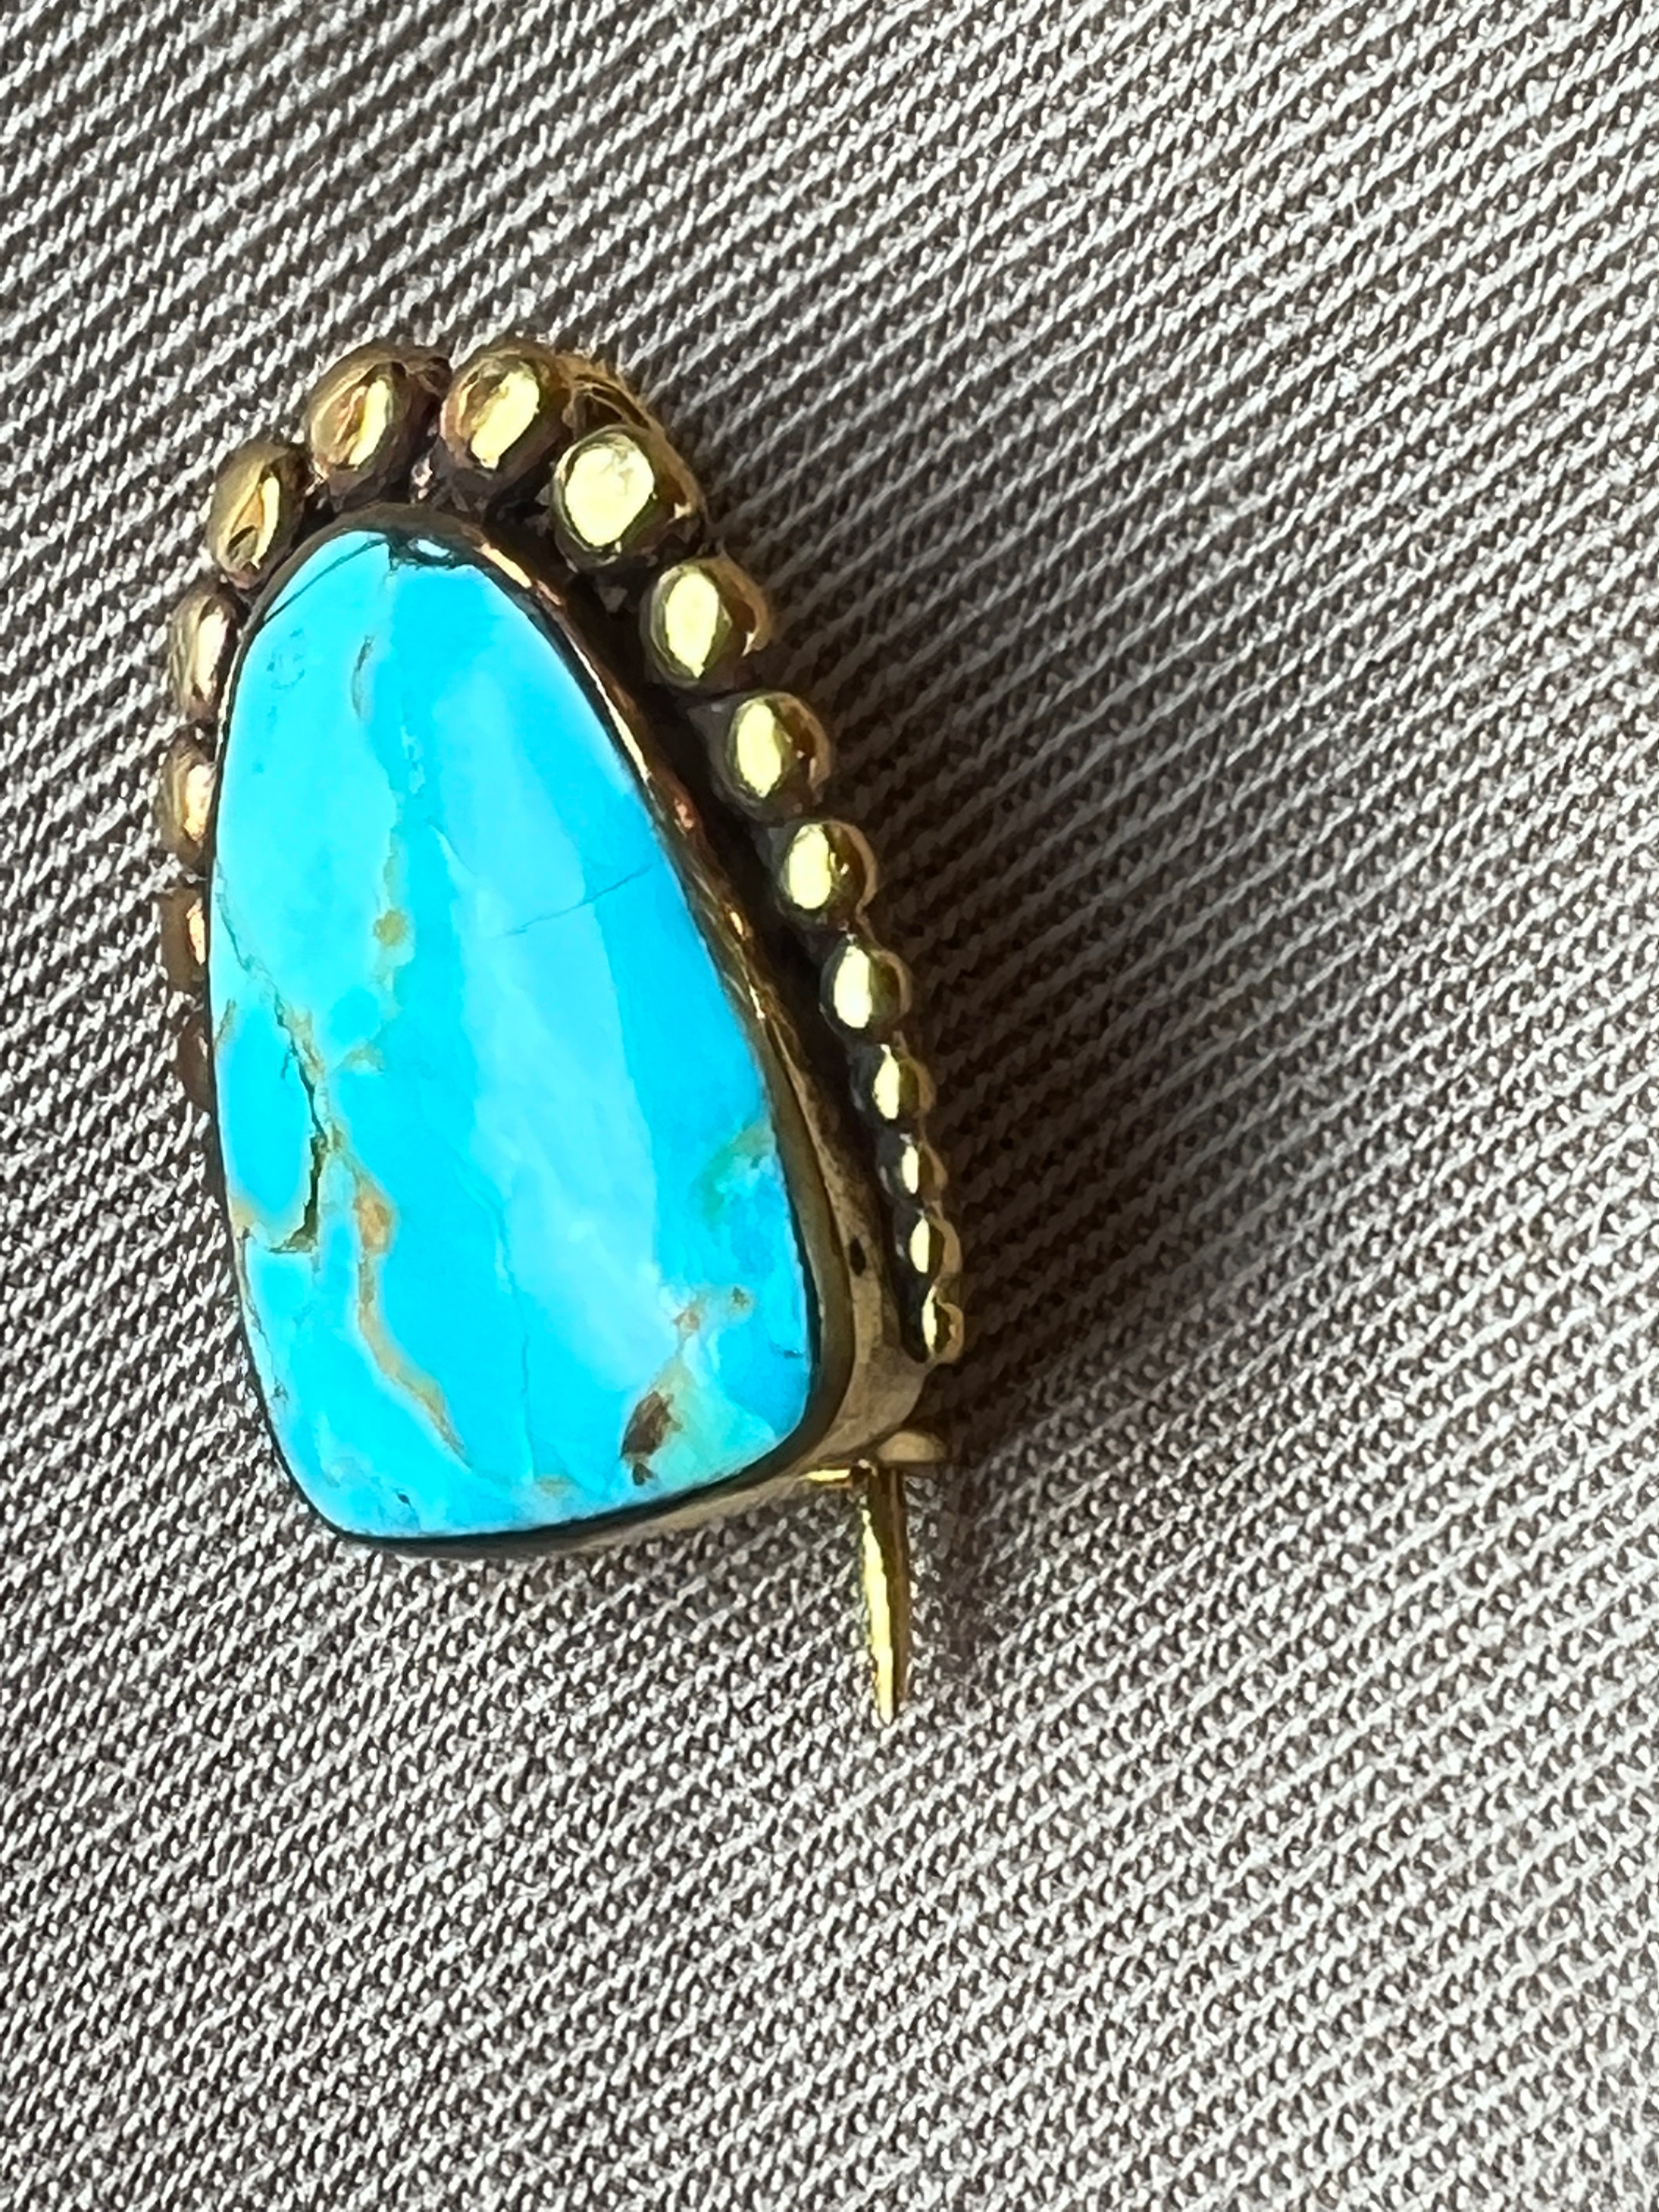 Future Nomads Brooches Turquoise Brooch Arch